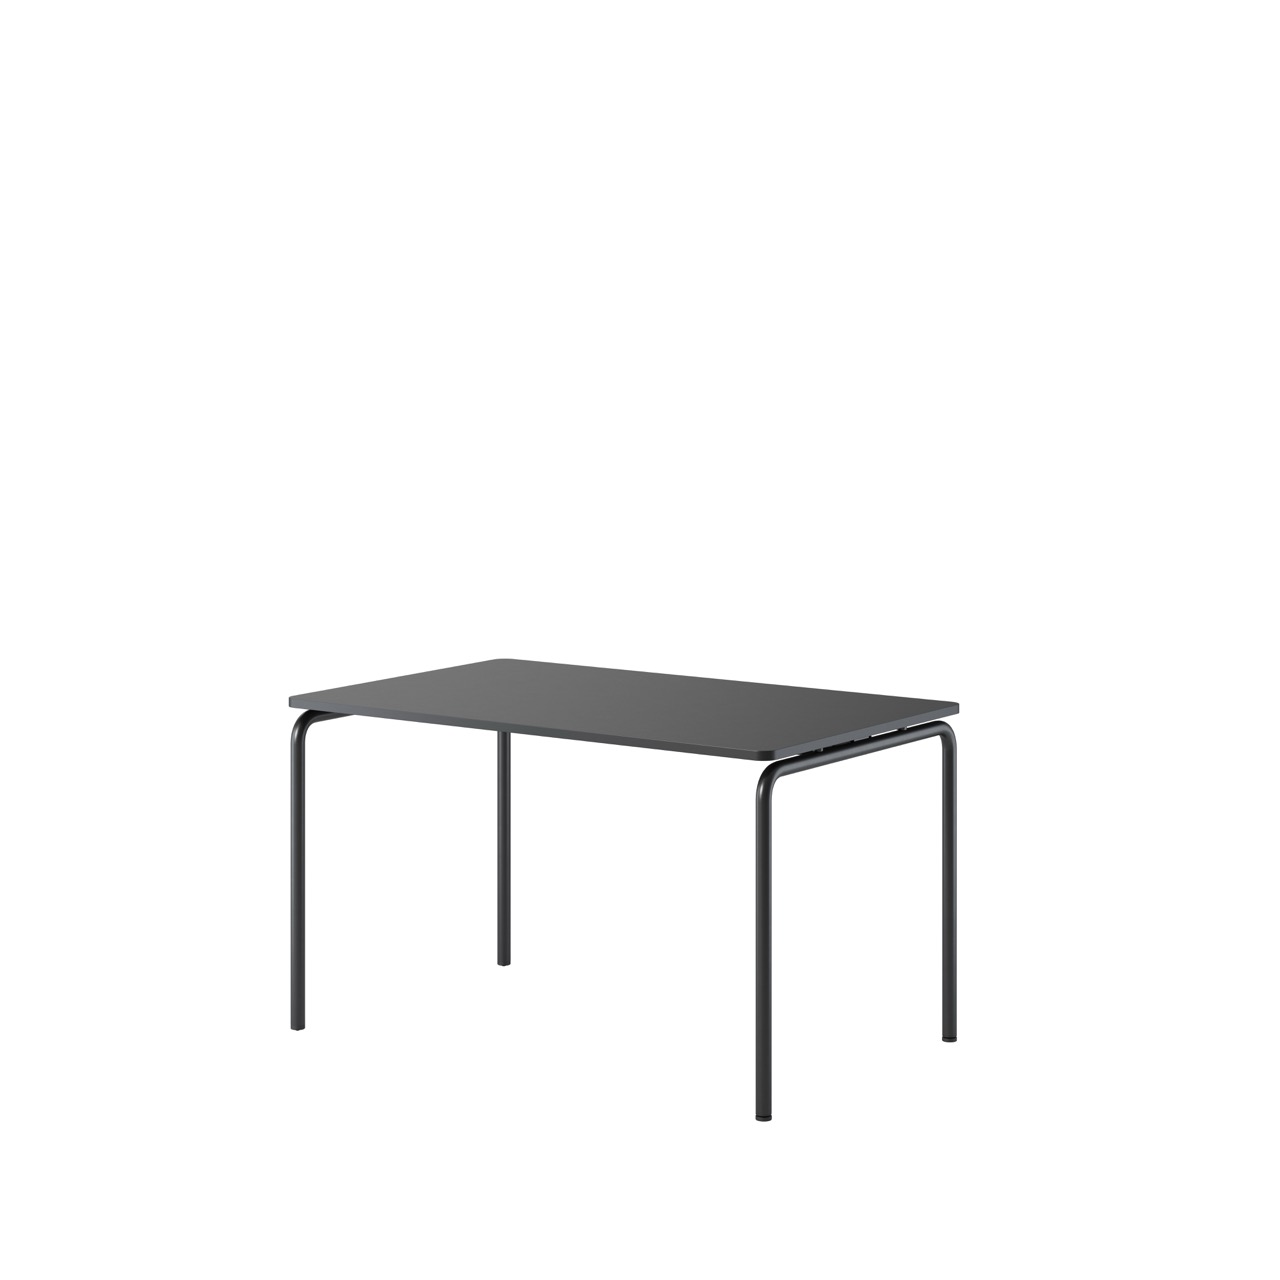 OCEE&FOUR - Tables - FourReal 74 - 120 x 80 - Straight - Packshot Image 1 Large